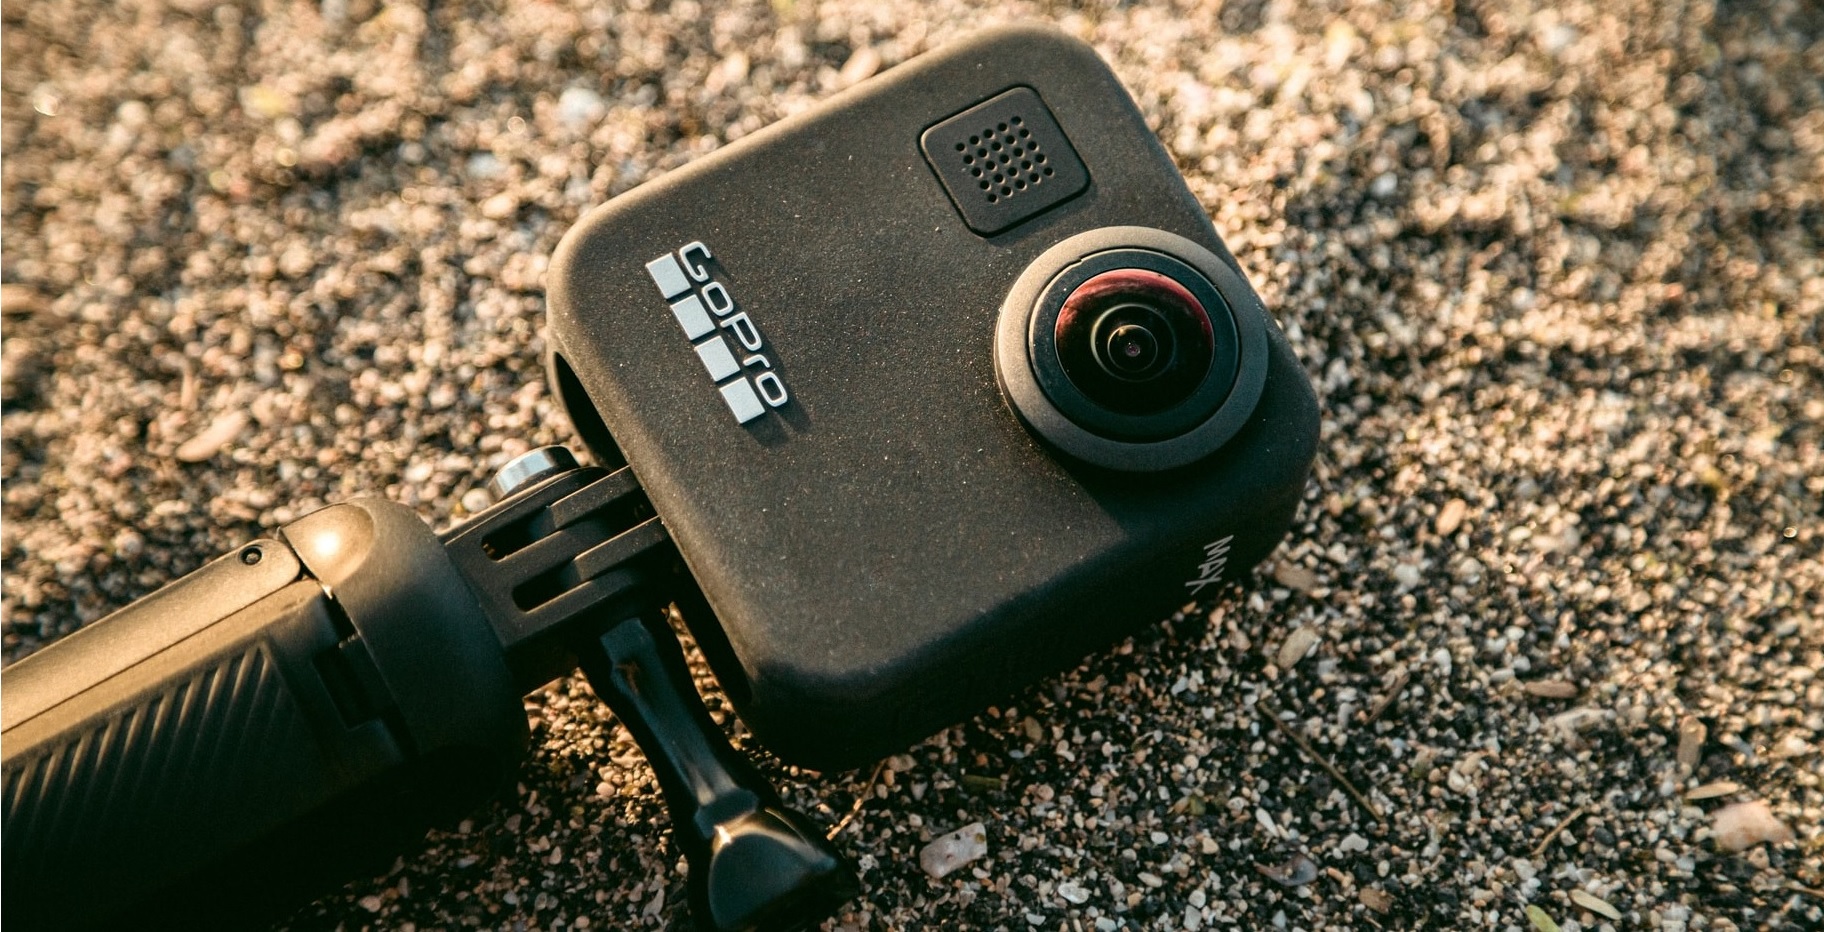 The GoPro Story
